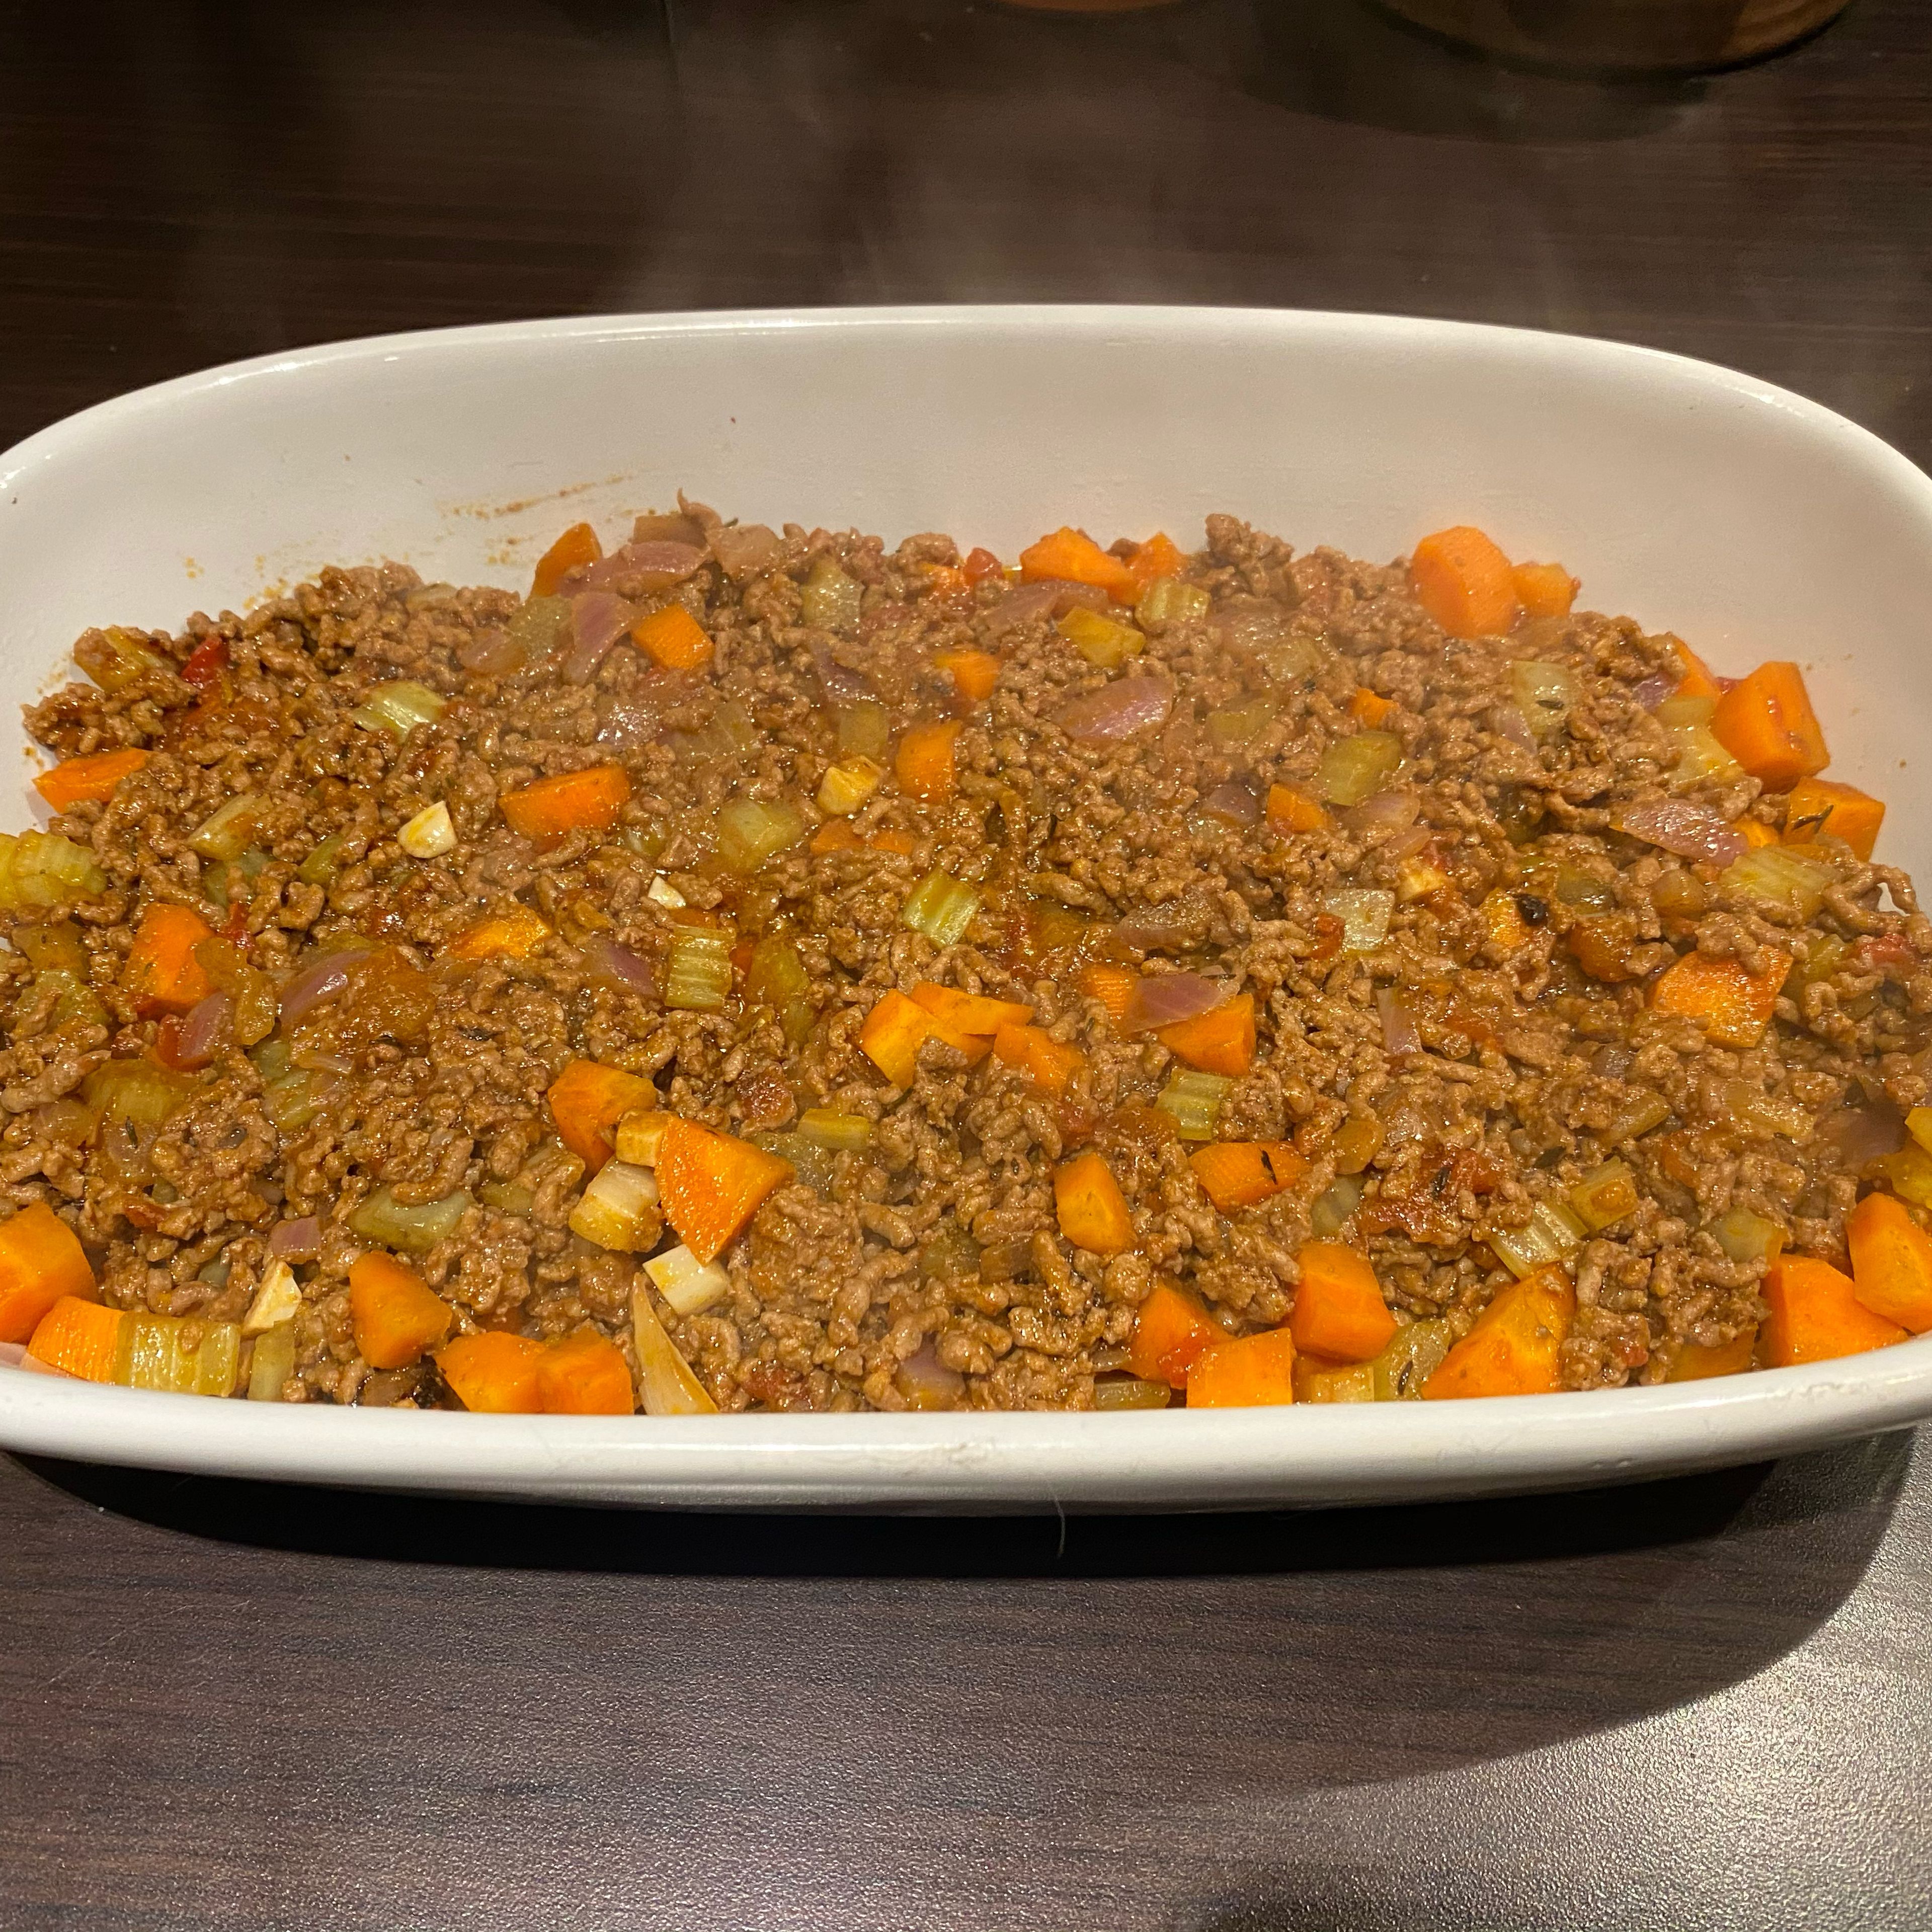 Spread beef mix in the bottom of an oven proof dish.